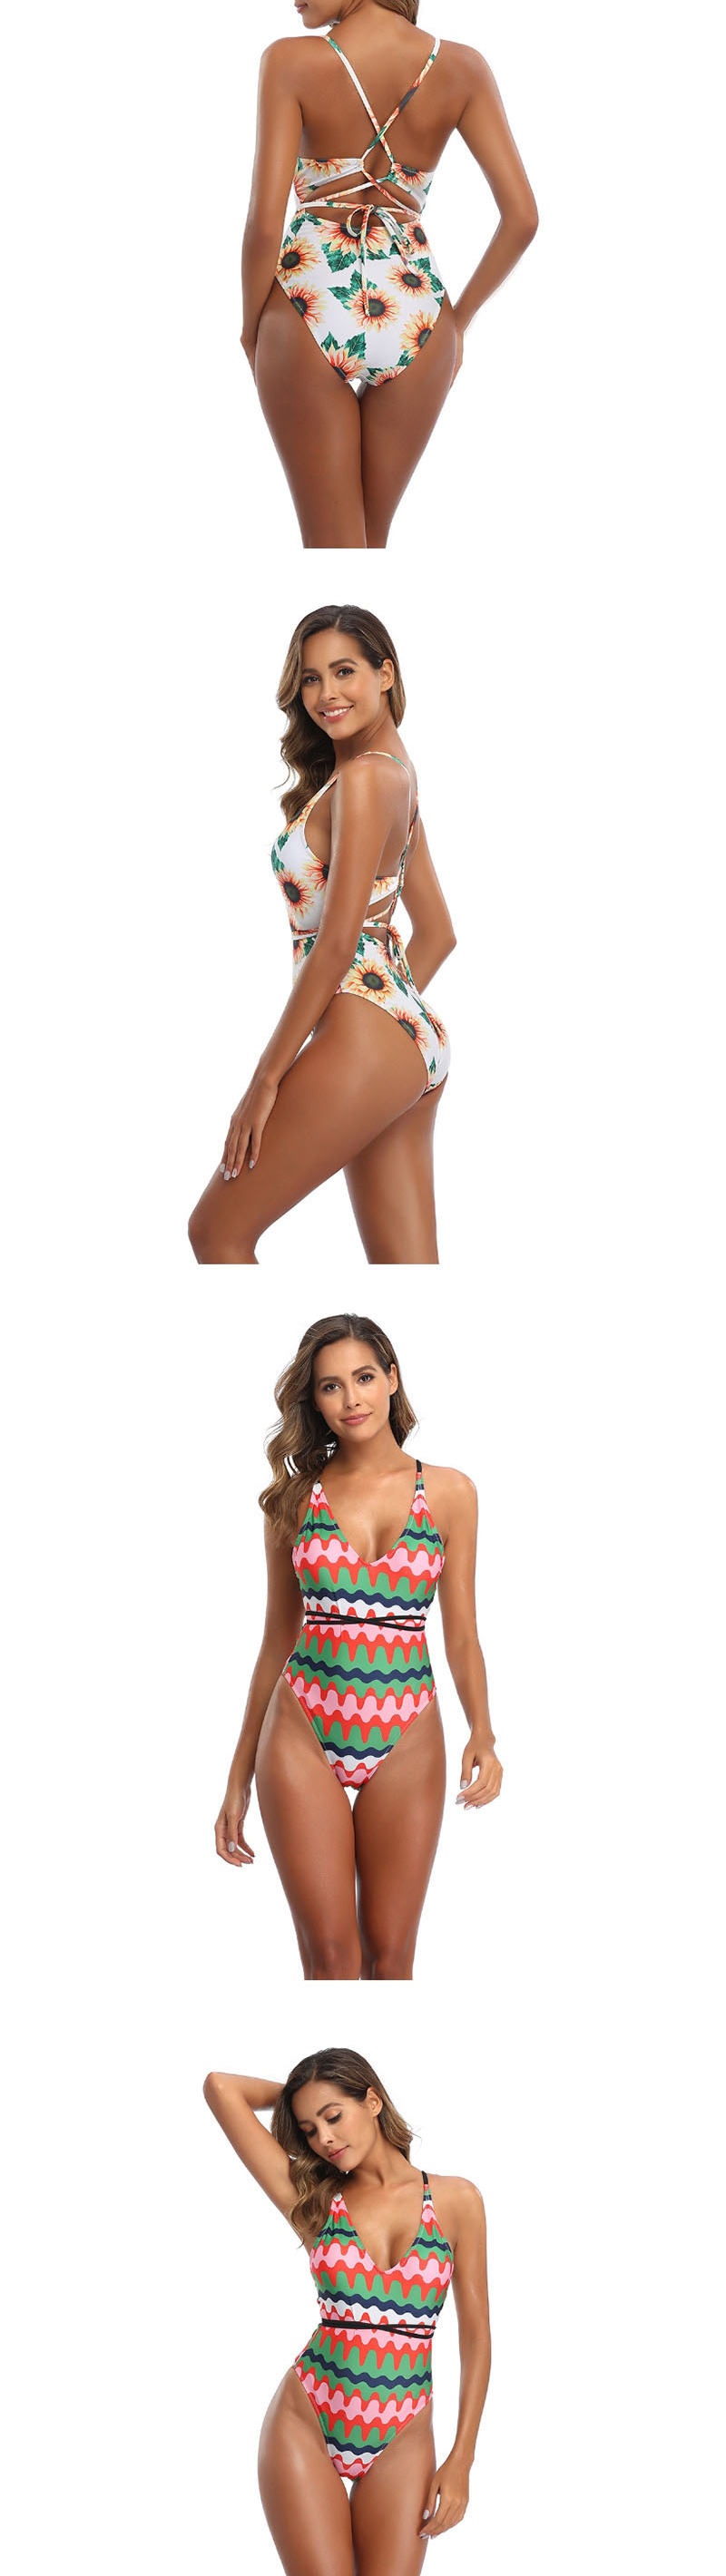 Fashion Blue Yellow Wave Printed One-piece Swimsuit,One Pieces